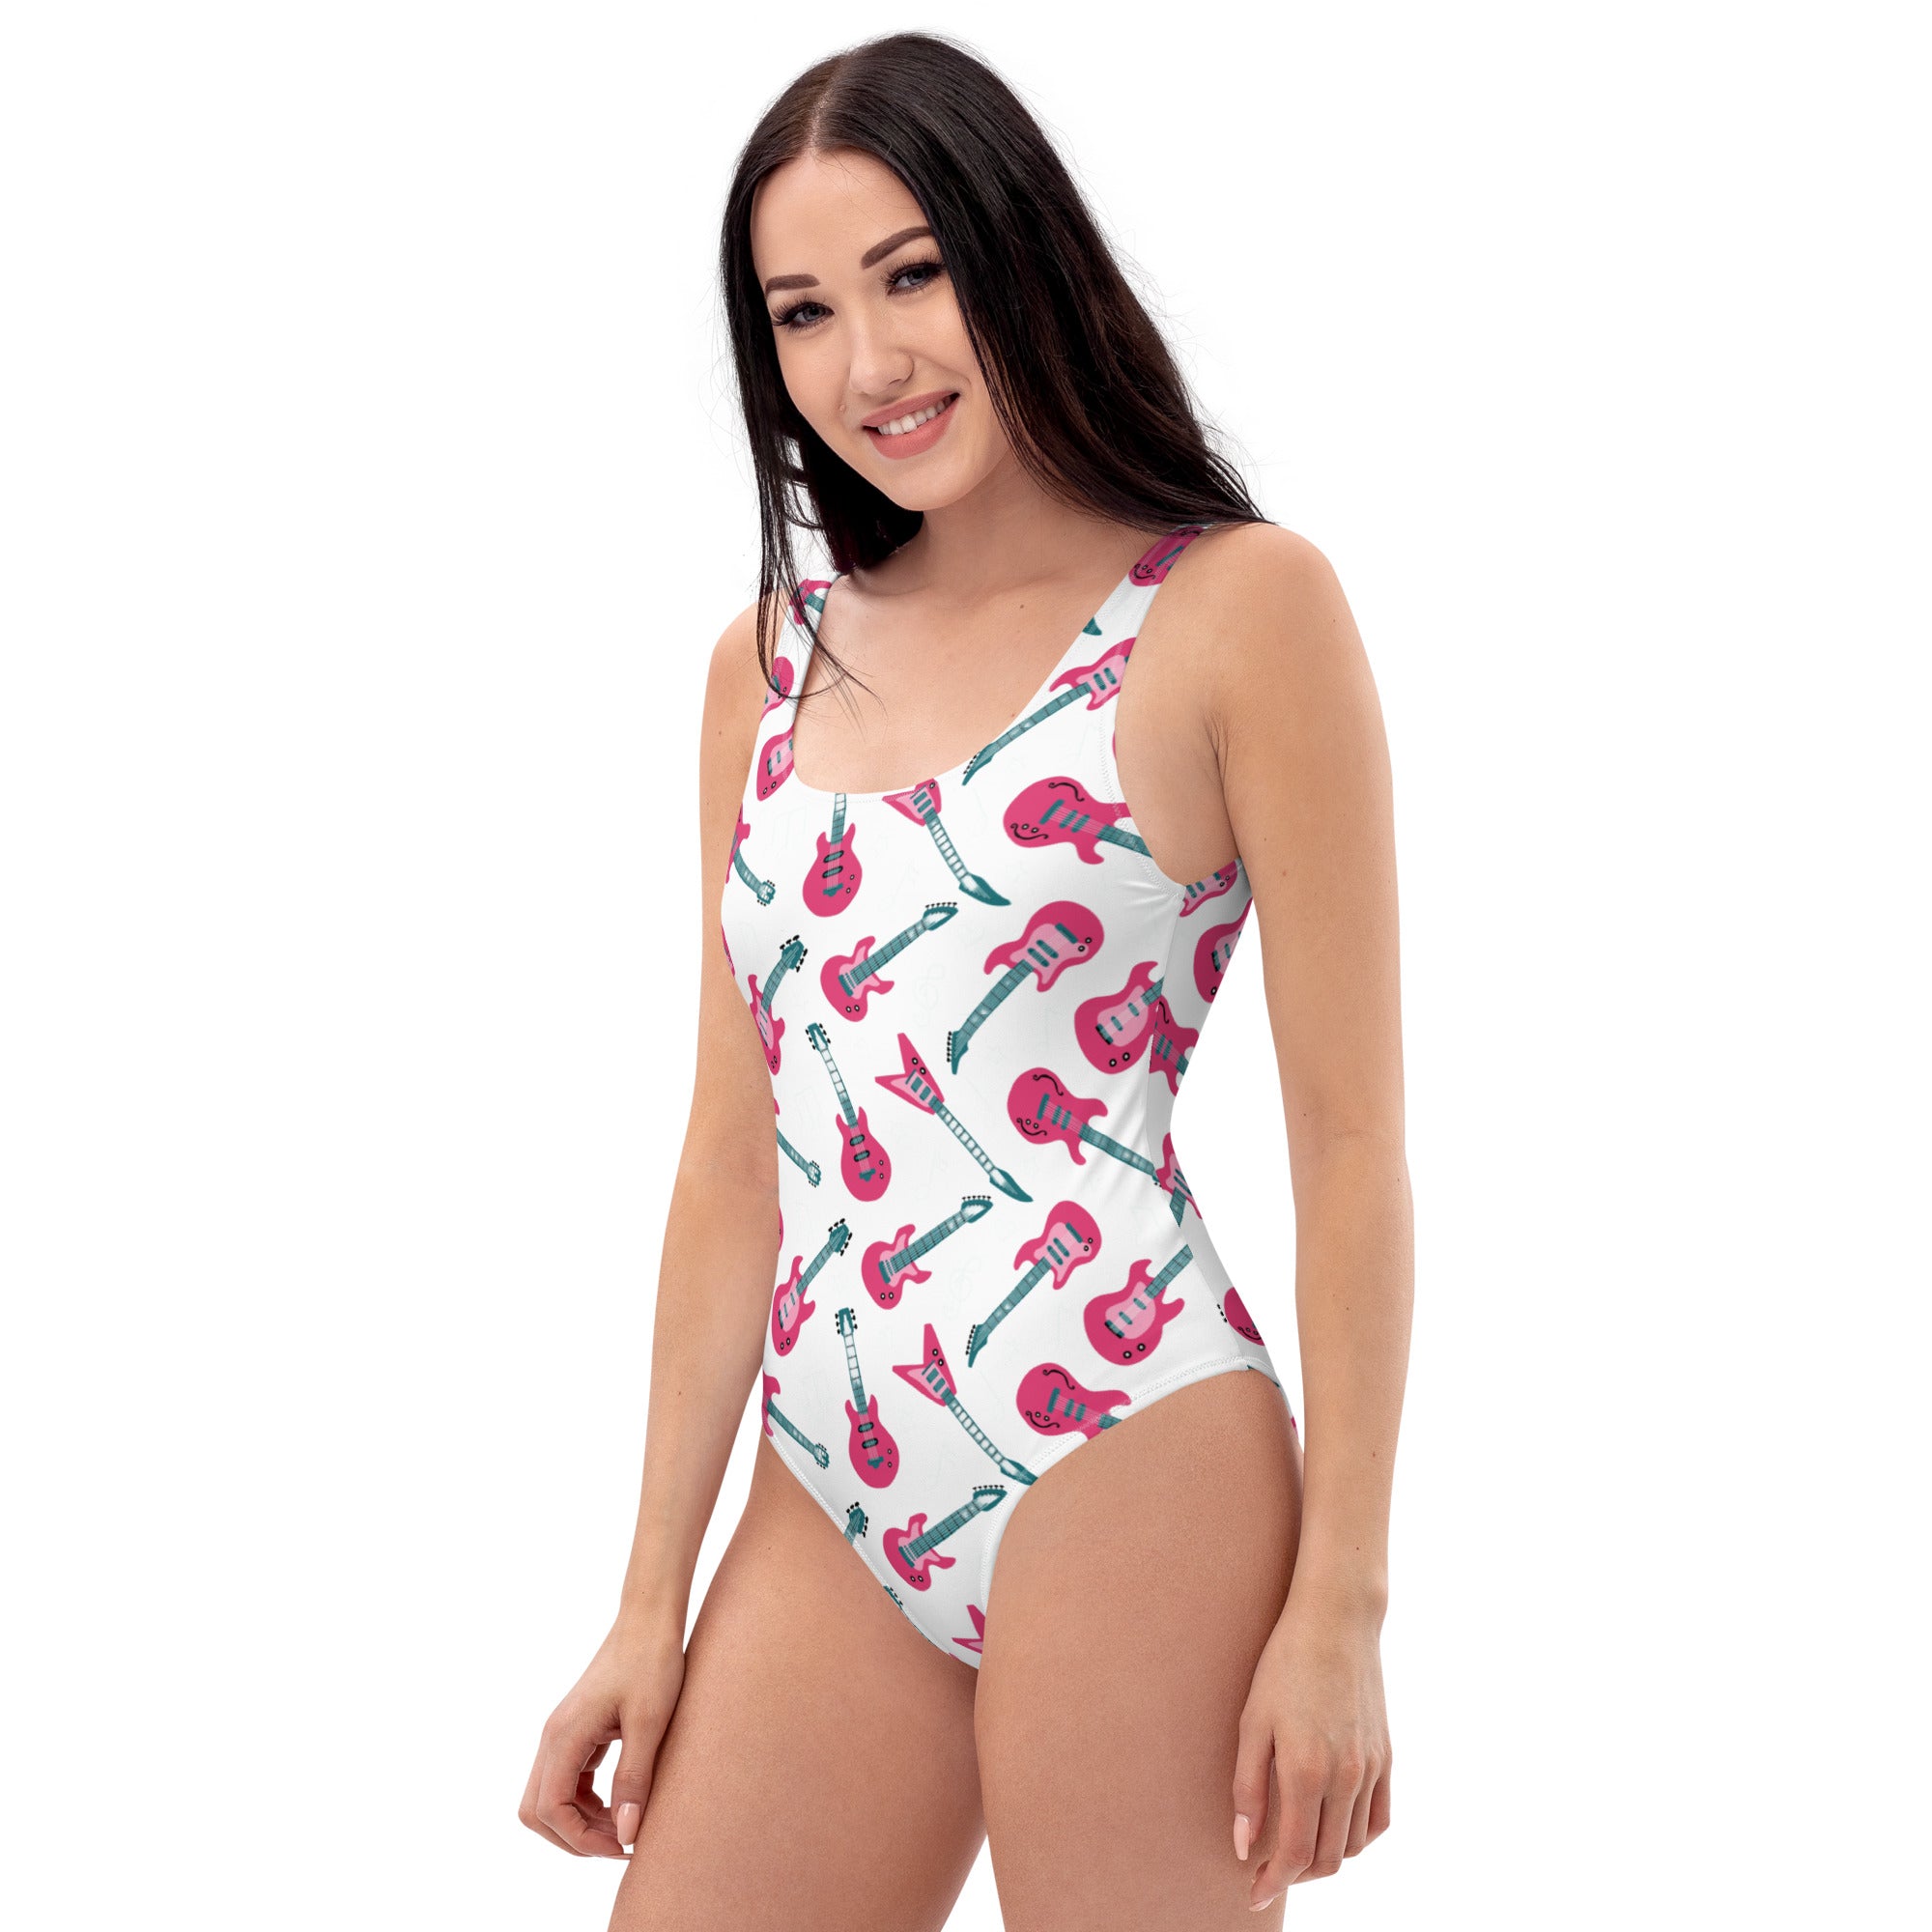 One-Piece Swimsuit, One-Piece Swimsuit, Beach Wear, Musical Bathing Suite, Travel, Gift